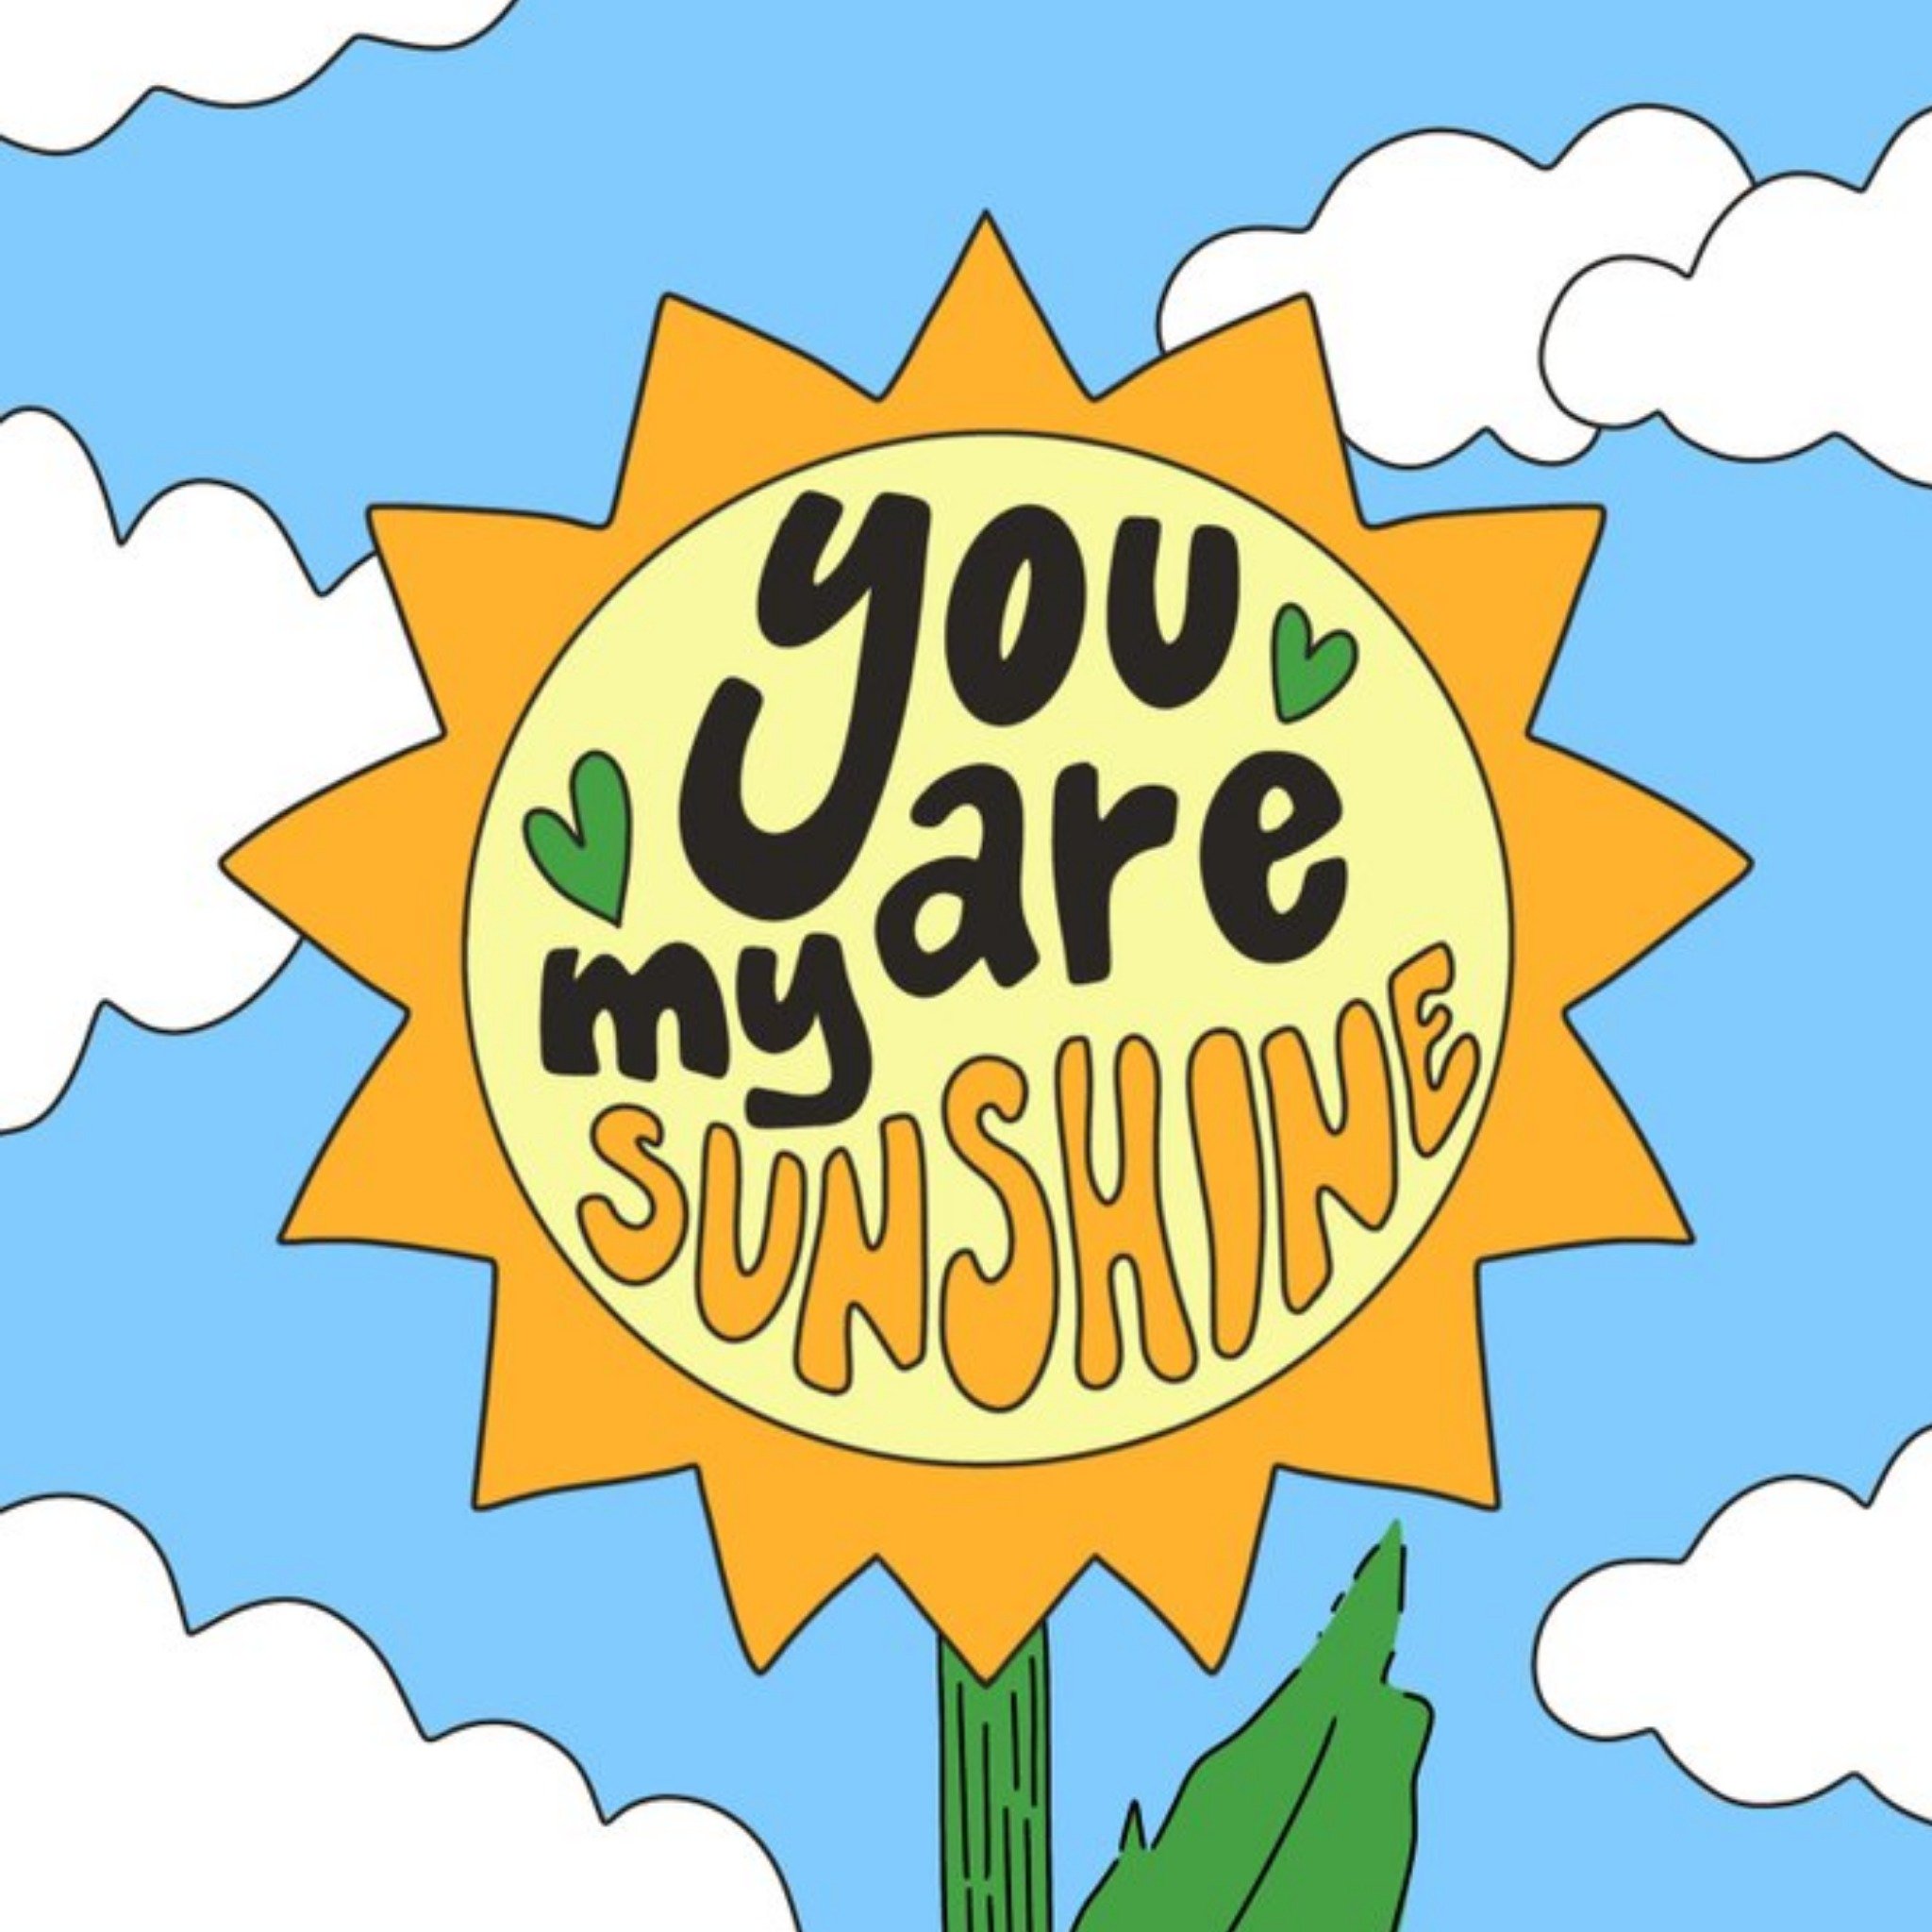 Moonpig Aleisha Earp Bright Illustration Of A Sunflower You Are My Sunshine Card, Square